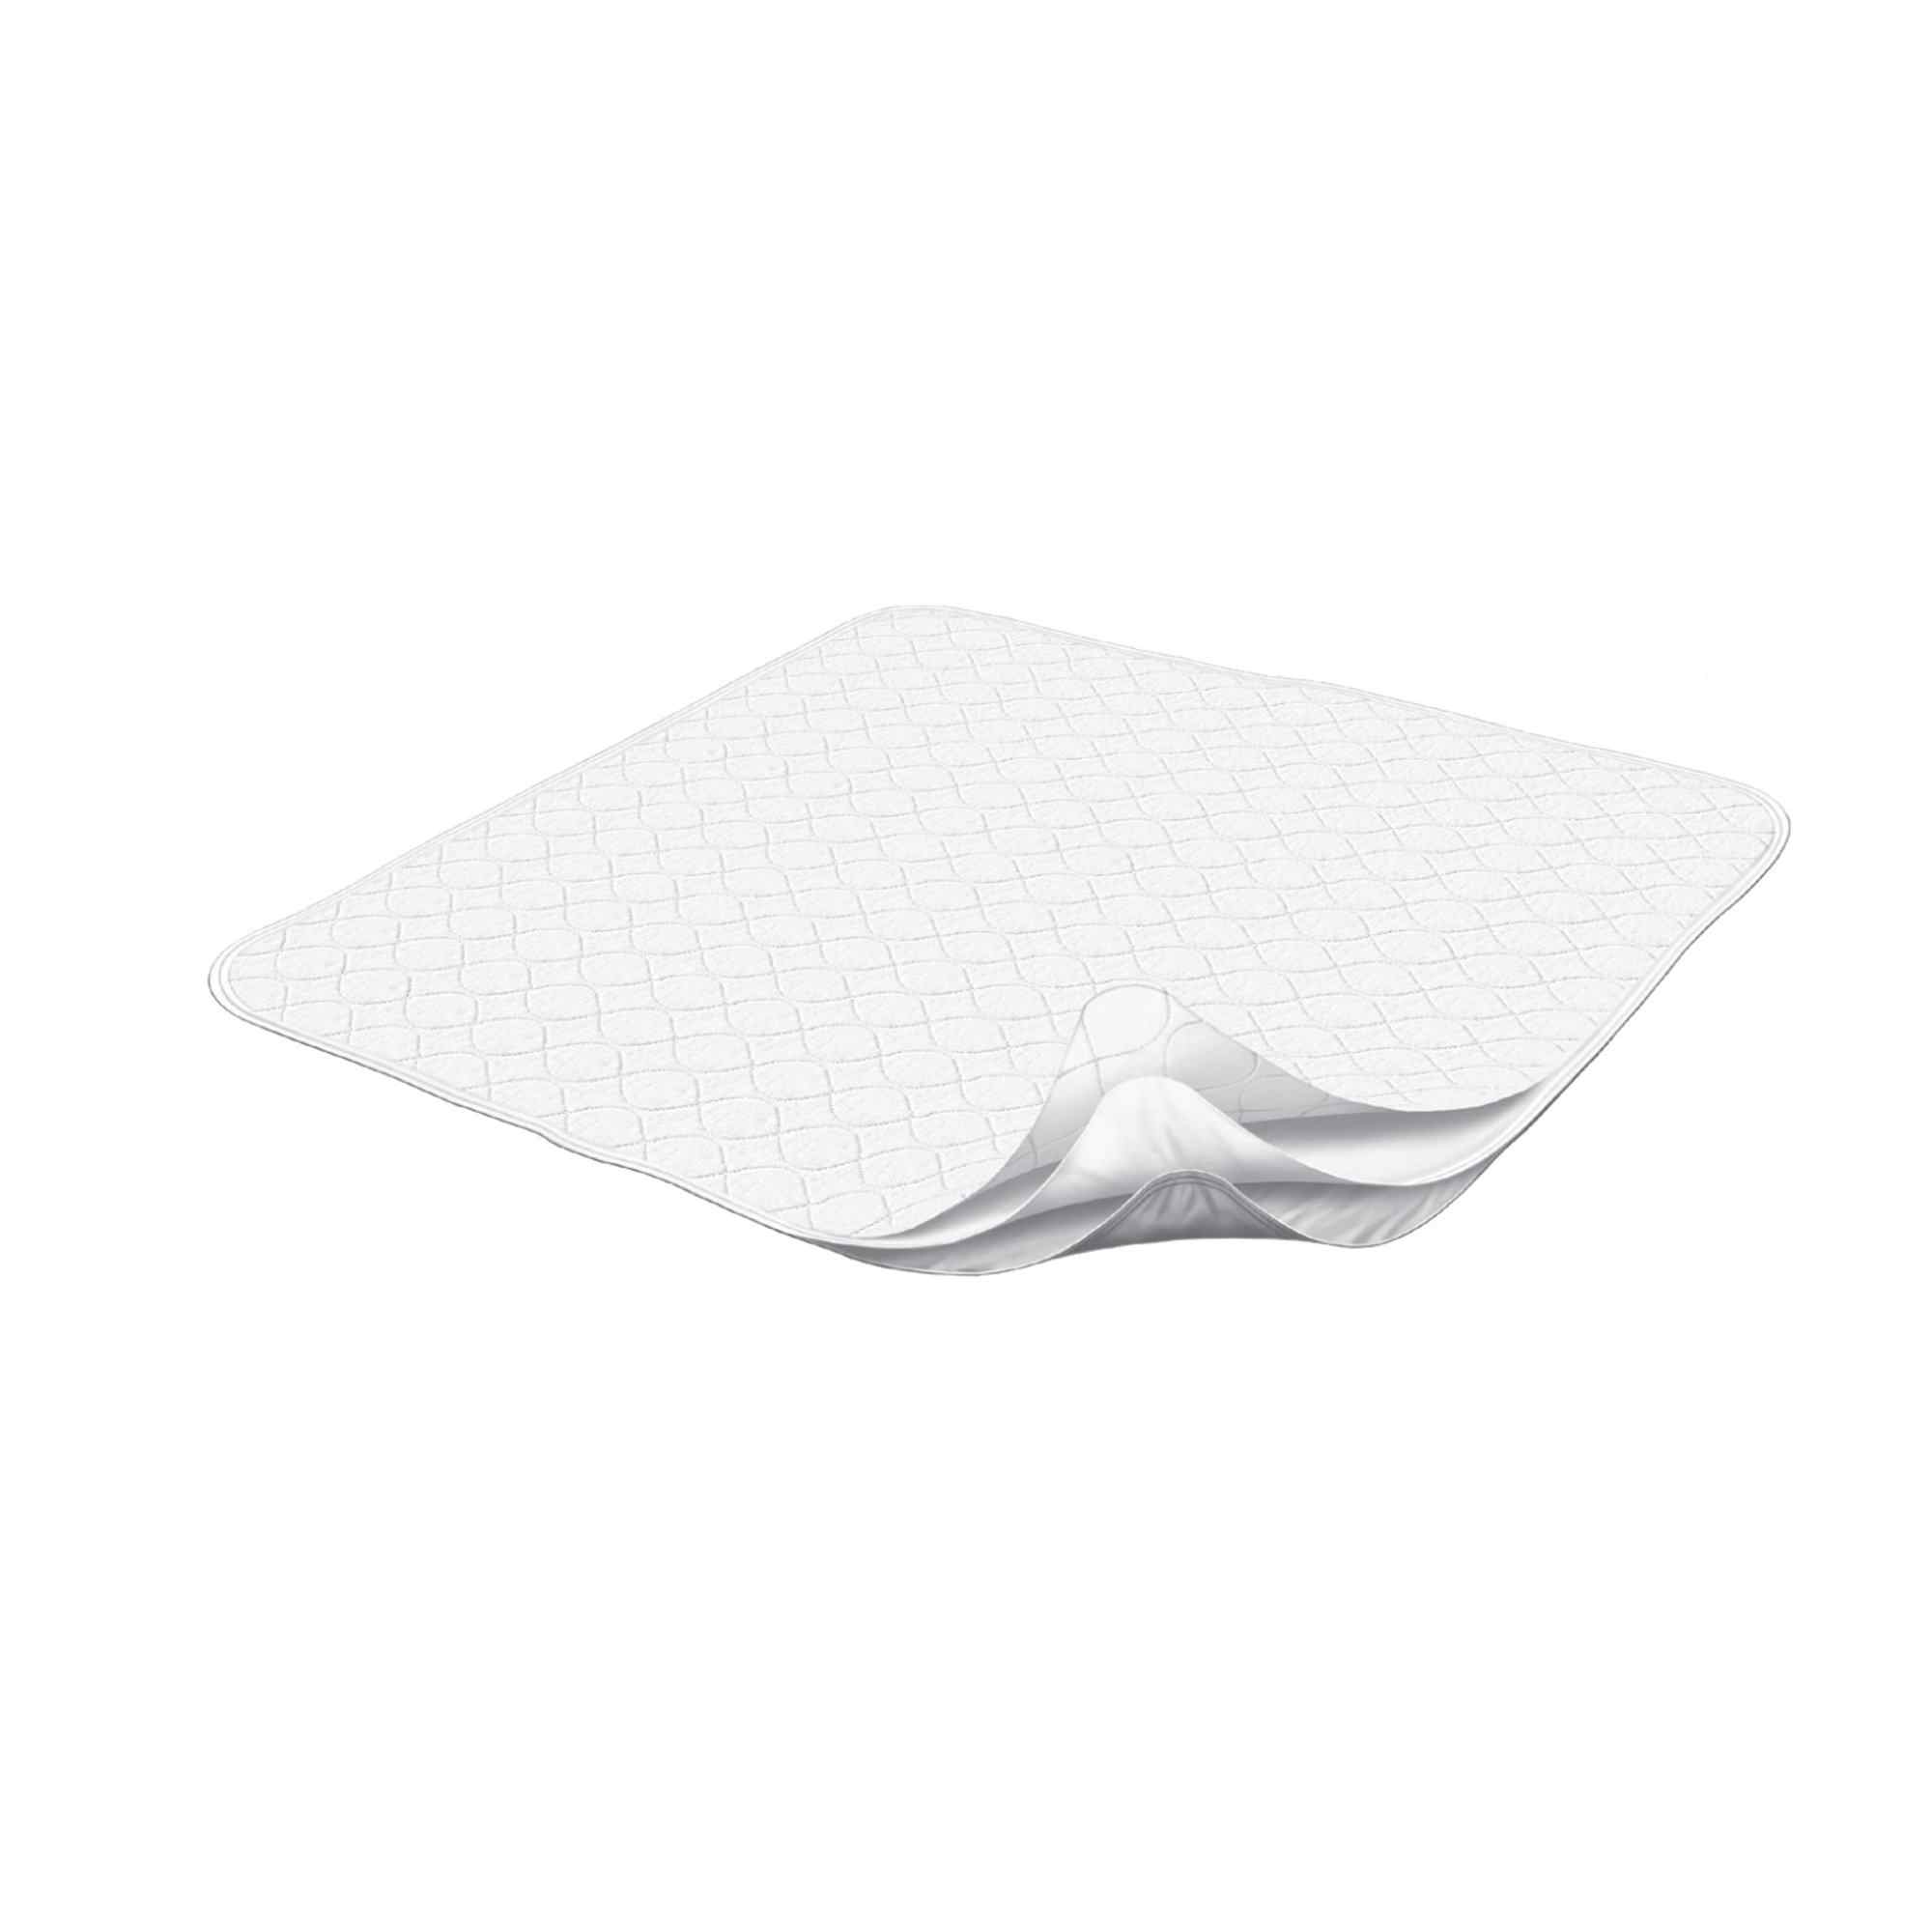 Dignity Waterproof Mattress Cover, Twin Size, Polyester/Vinyl